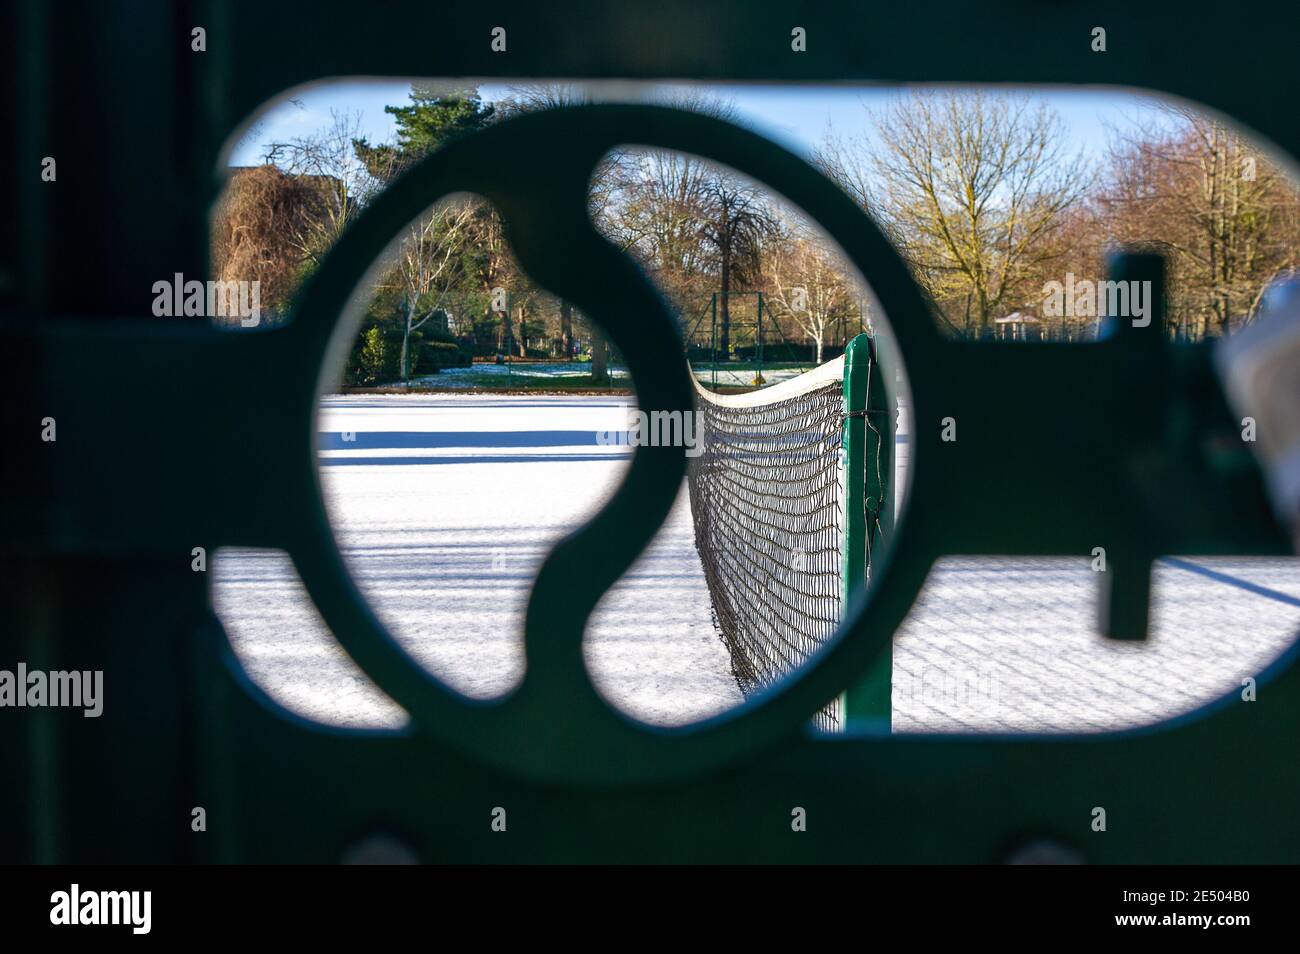 Windsor, Berkshire, UK. 25th Janaury, 2021. Snow lays on a public tennis court in Windsor after yesterday's snowfall. The tennis courts are currently closed due to the Covid-19 Coronavirus lockdown. Credit: Maureen McLean/Alamy Live News Stock Photo